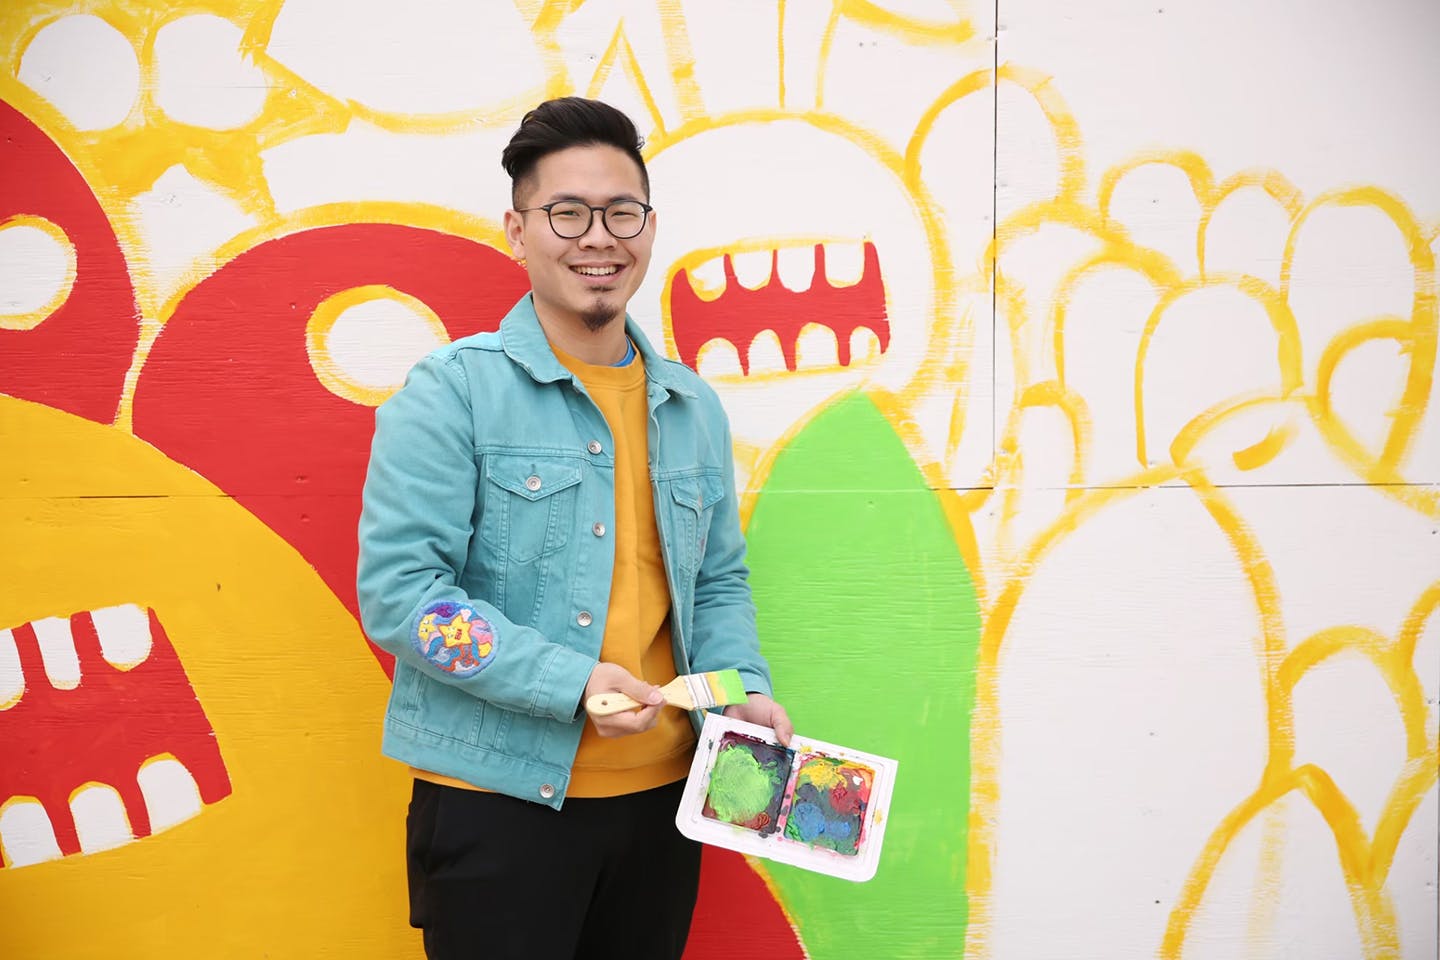 James Hsieh: Creating Art for Shared Dreams